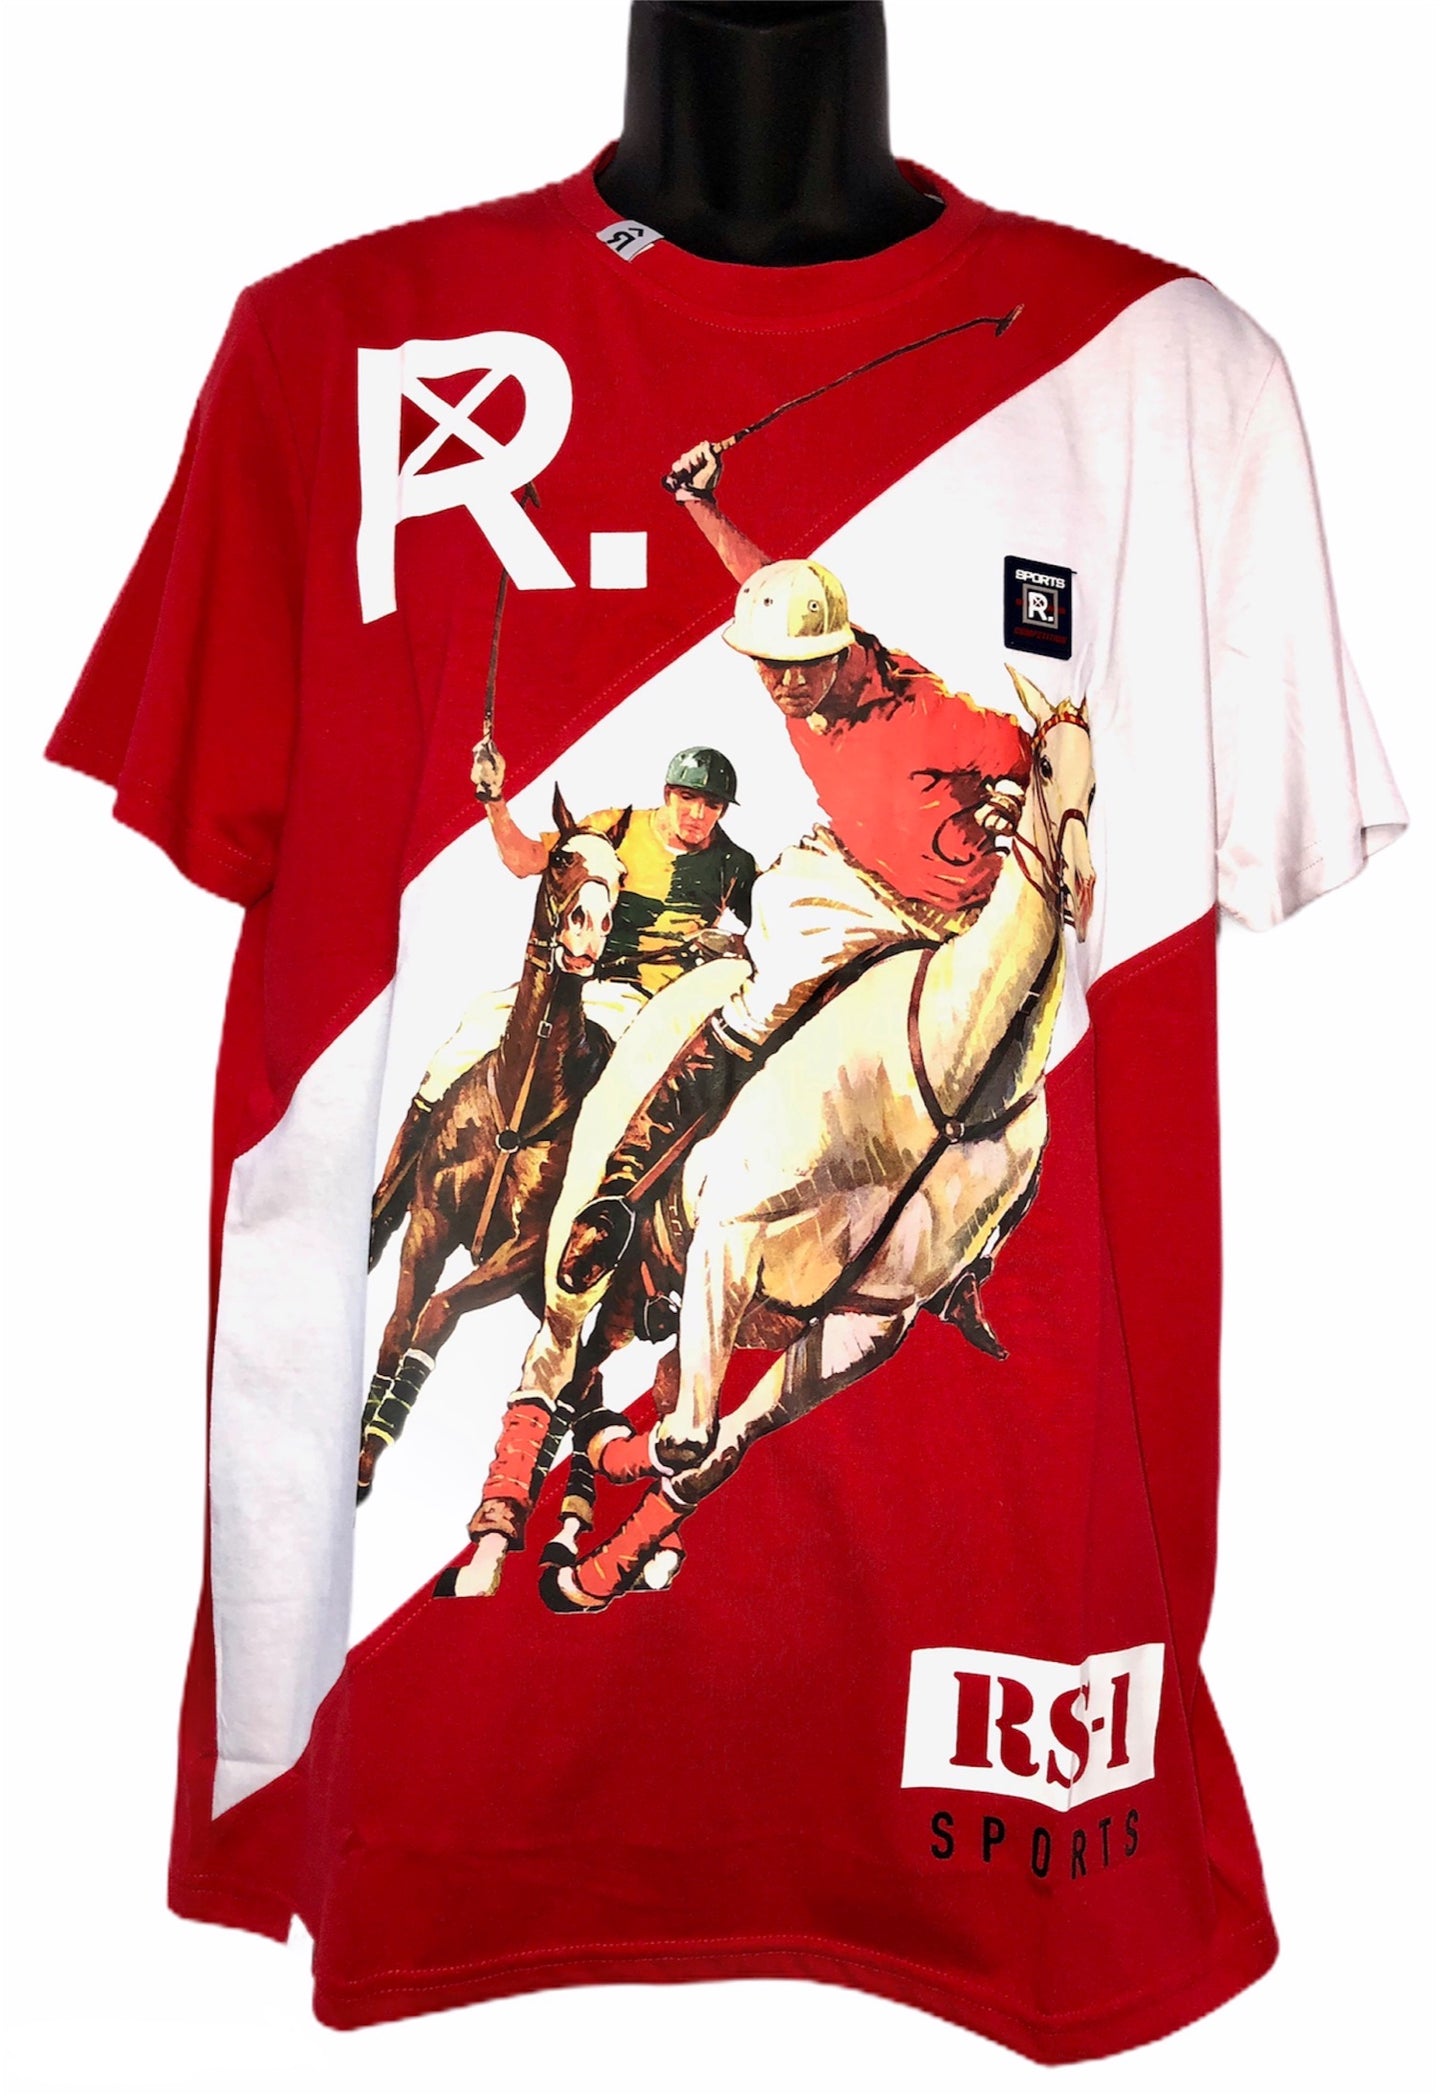 The Game of Polo T-Shirt